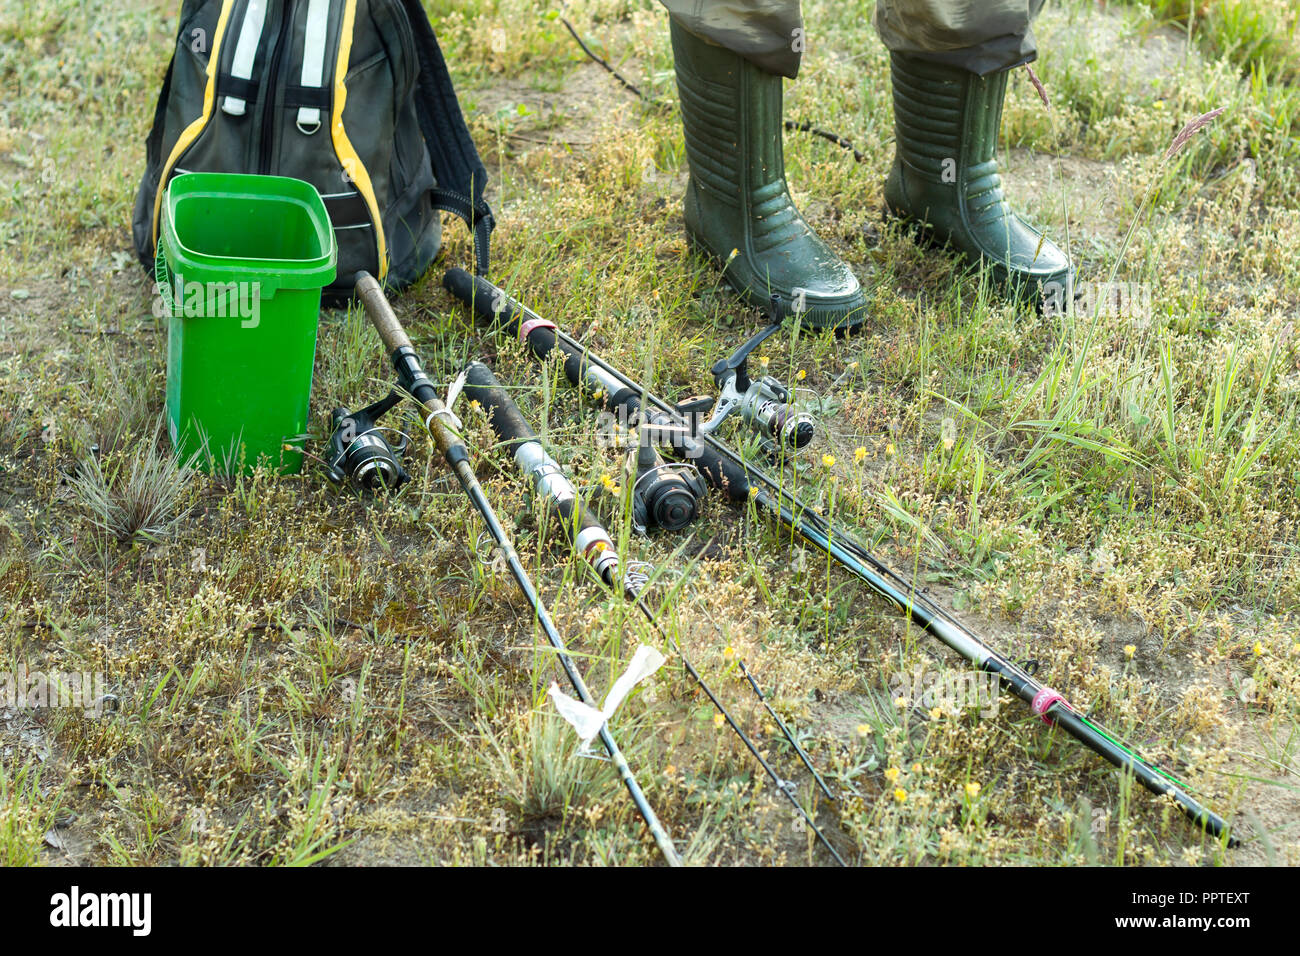 Fishing rods are lying on the ground. An angler in rubber boots